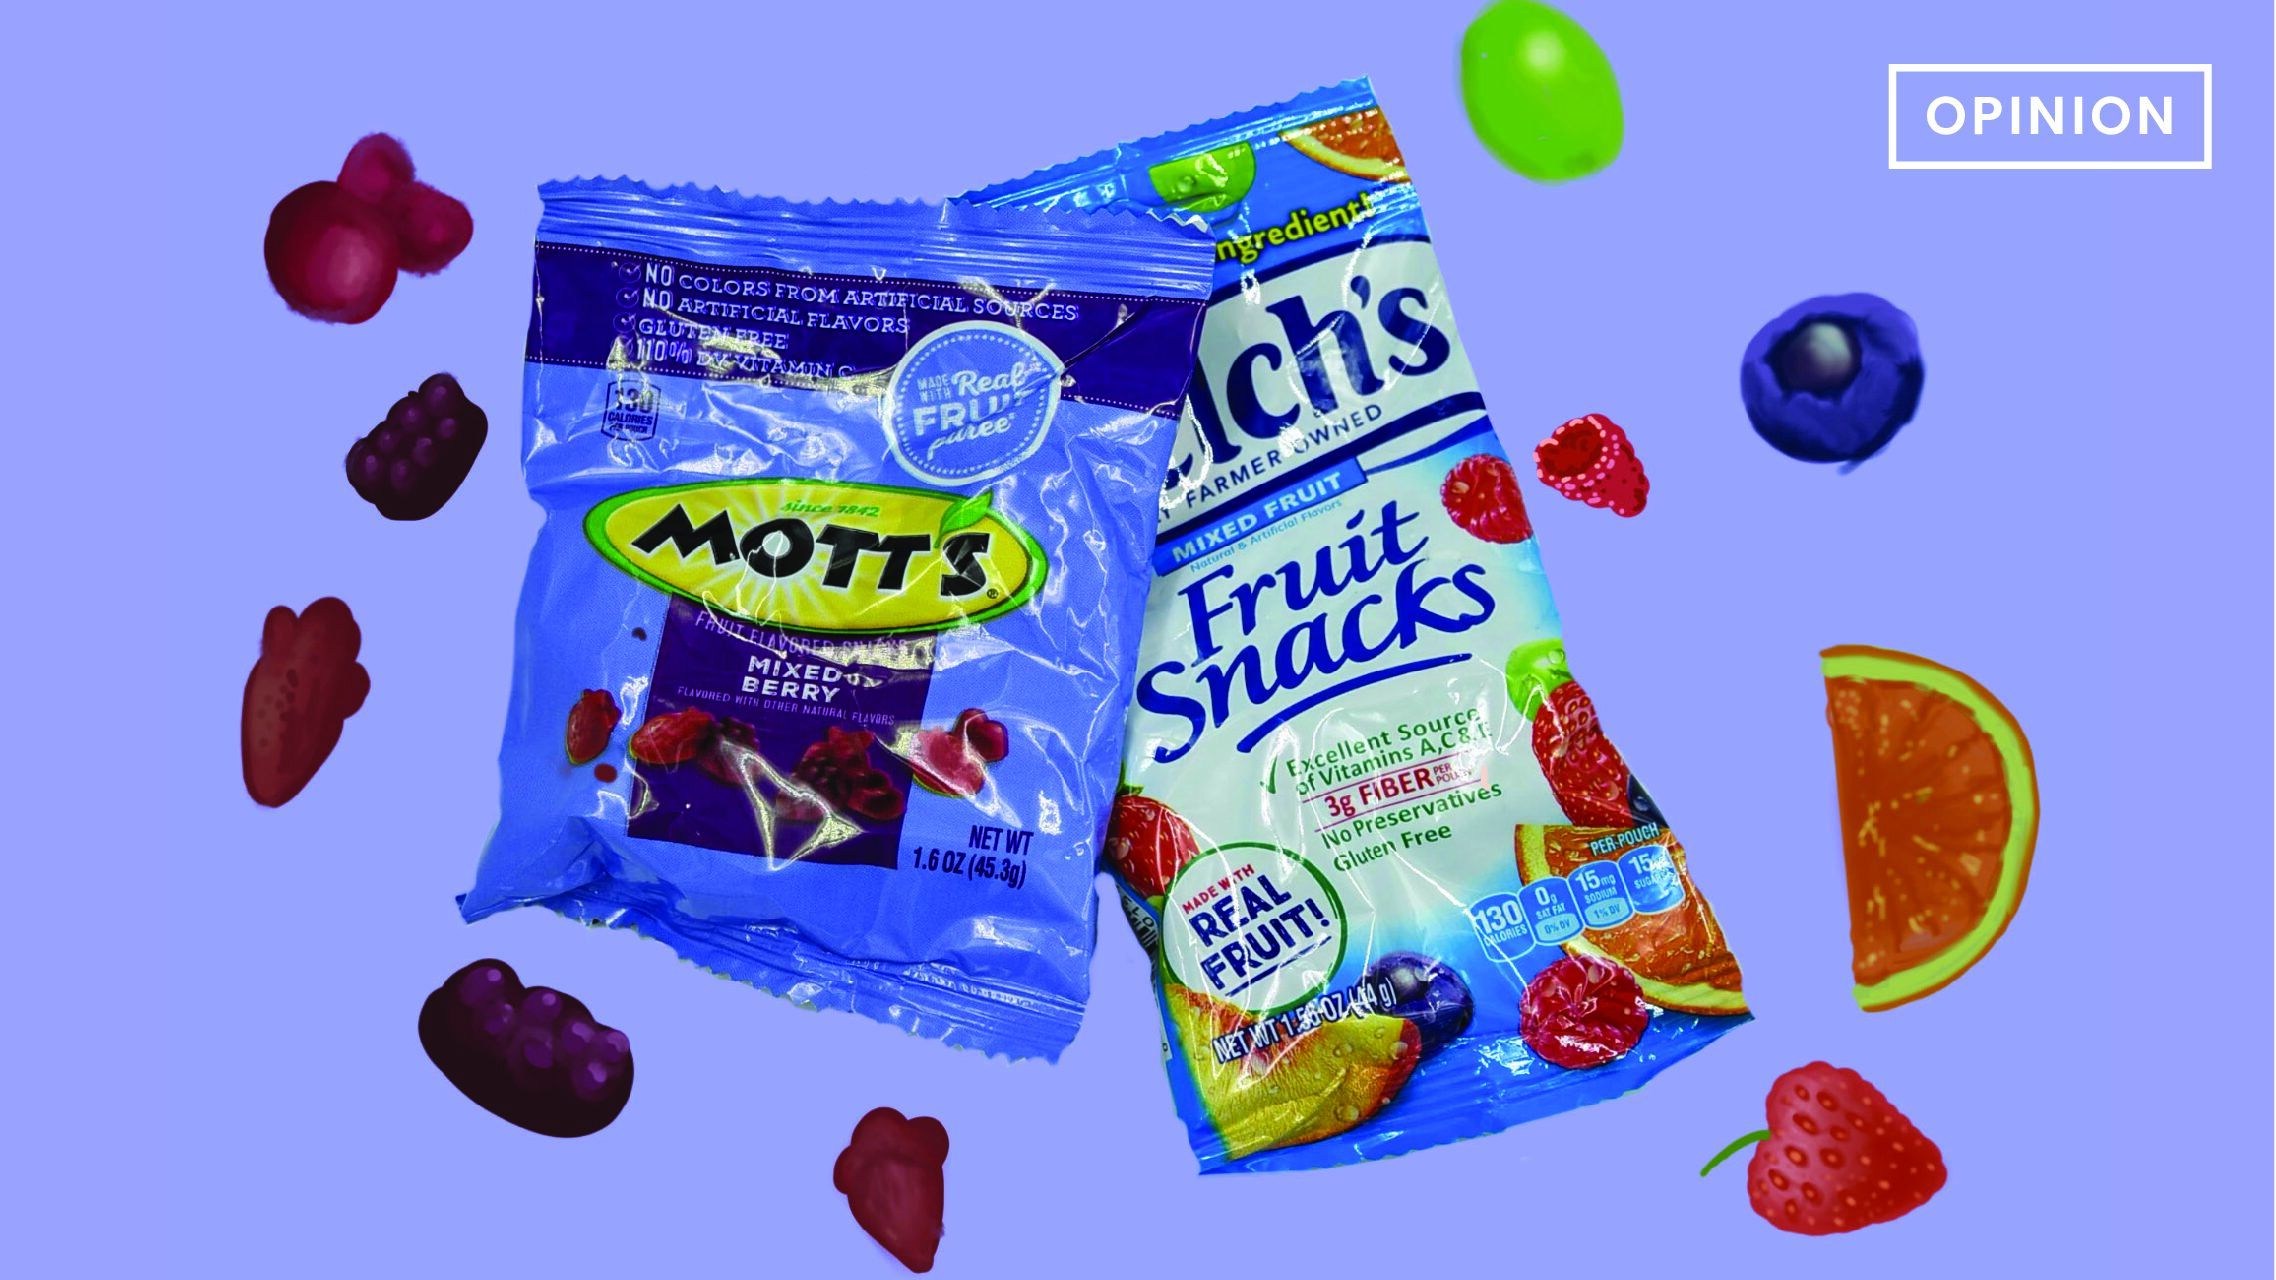 Battle of the Berries: A head to head debate about whether Mott’s or Welch’s fruit snacks are better